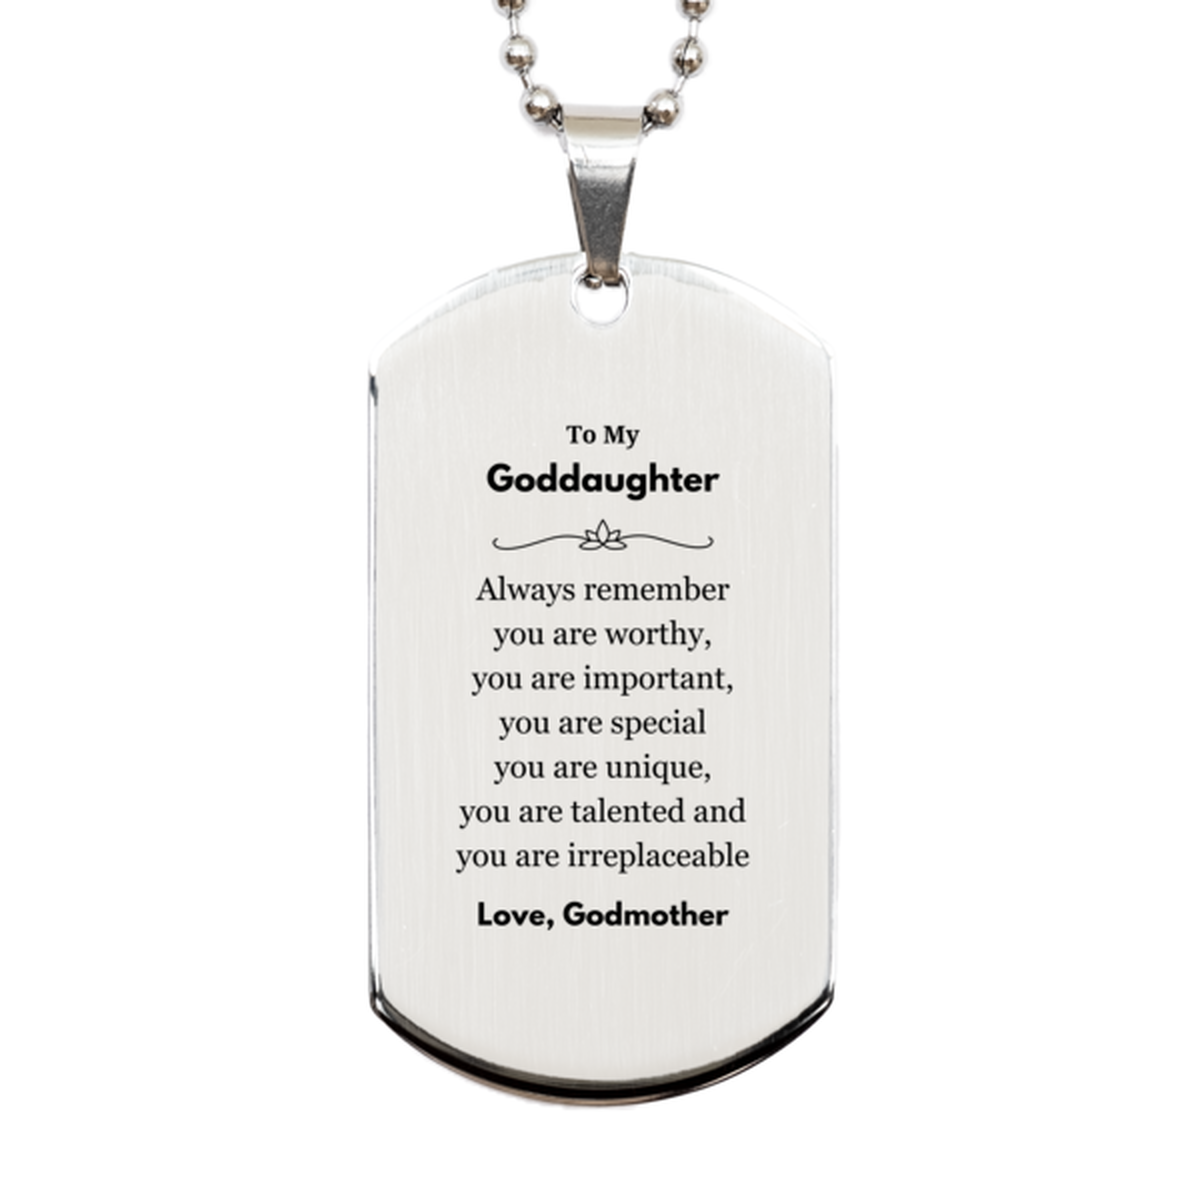 Goddaughter Birthday Gifts from Godmother, Inspirational Silver Dog Tag for Goddaughter Christmas Graduation Gifts for Goddaughter Always remember you are worthy, you are important. Love, Godmother